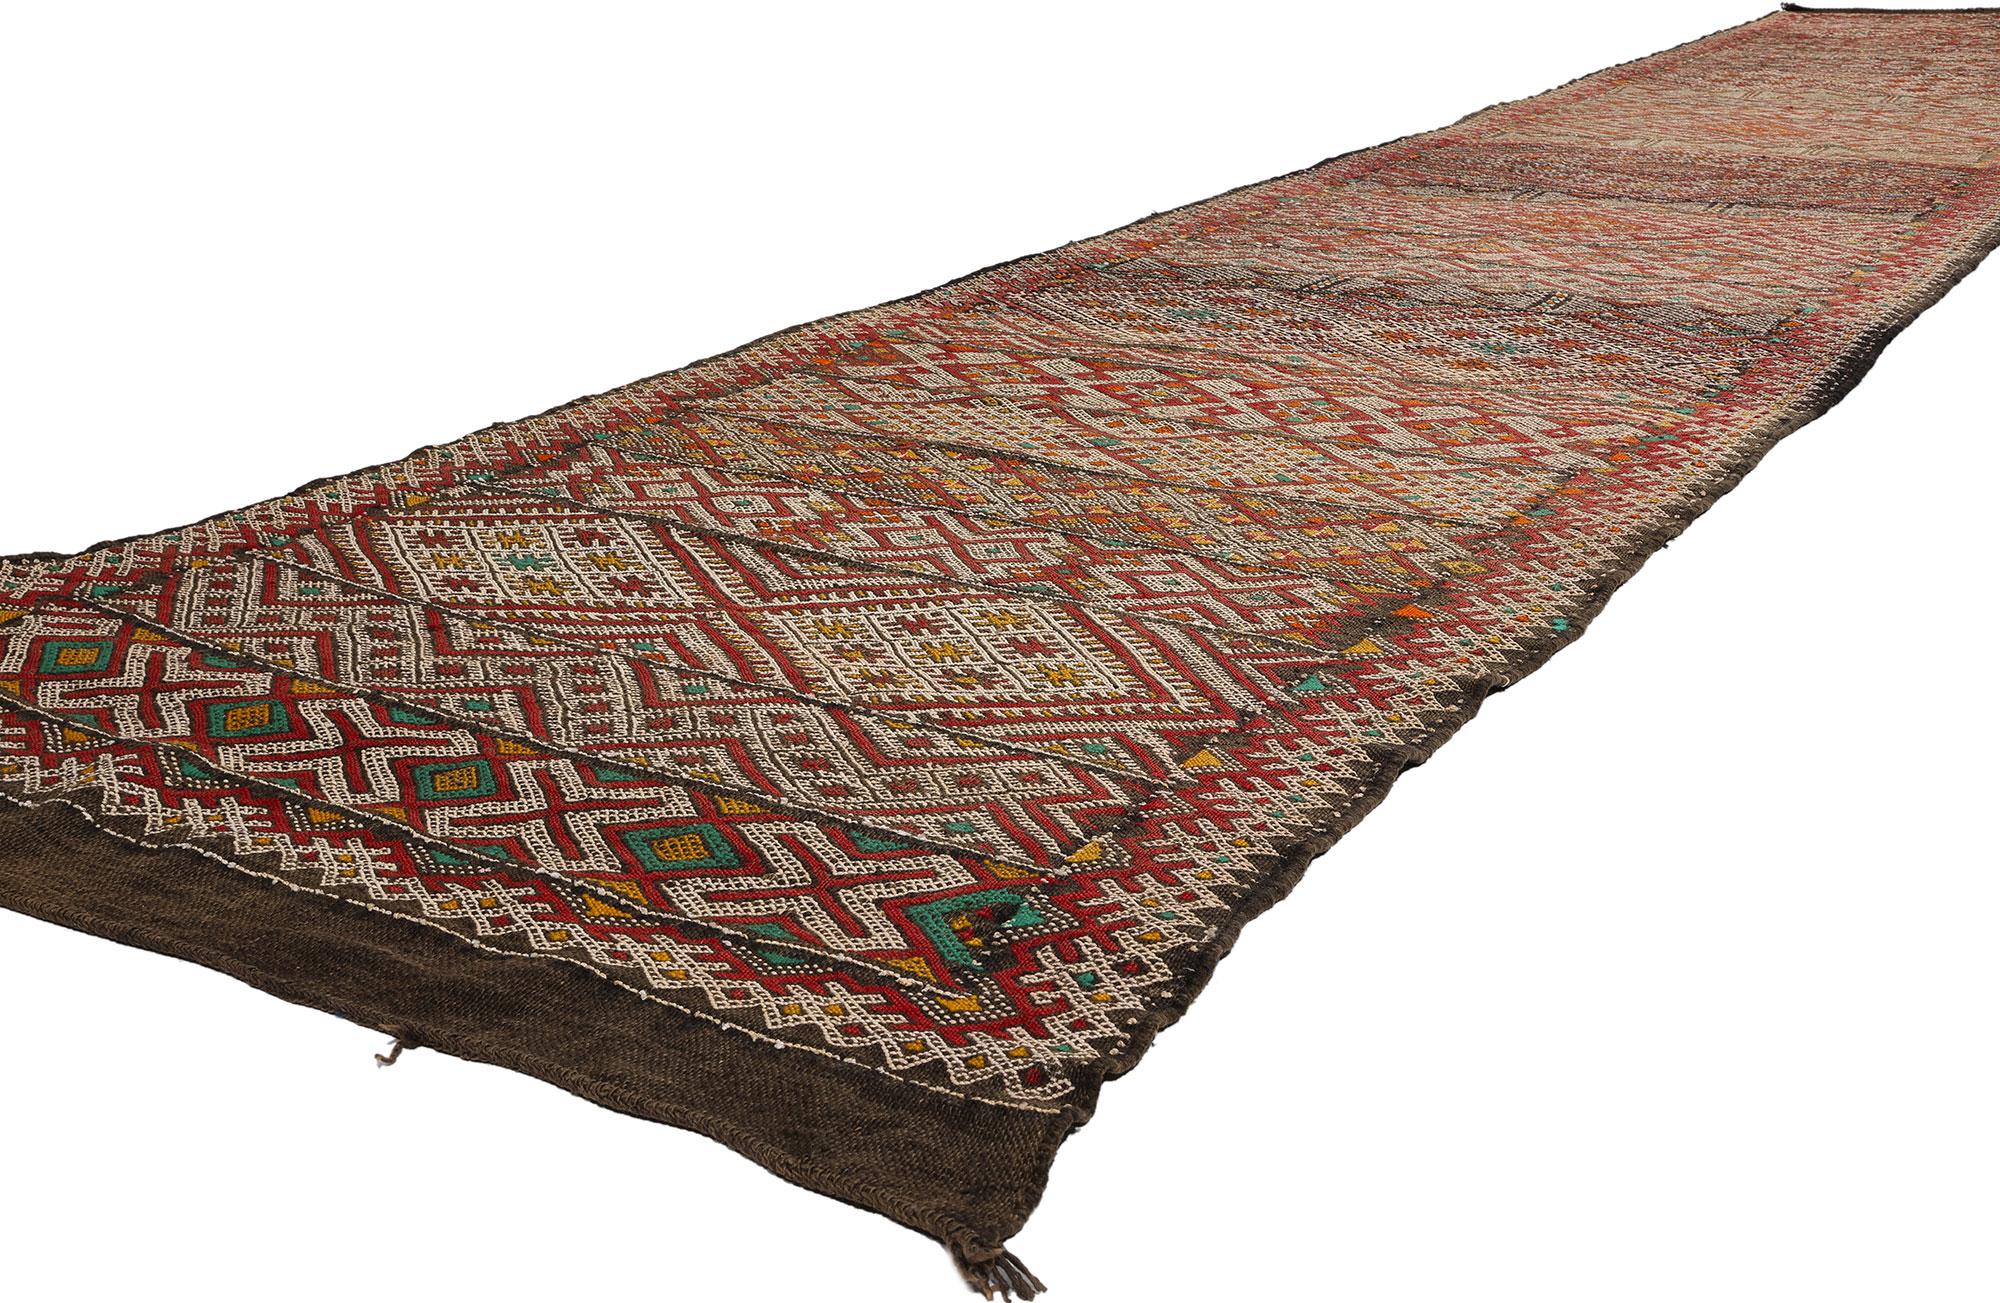 21849 Vintage Zemmour Moroccan Rug Runner, 03'10 x 21'06. 
Presenting anexquisite handwoven wool hanbel rug, a captivating extra-long Moroccan kilim runner crafted by the skilled artisans of the Zemmour Tribe nestled in the Middle Atlas Mountains of